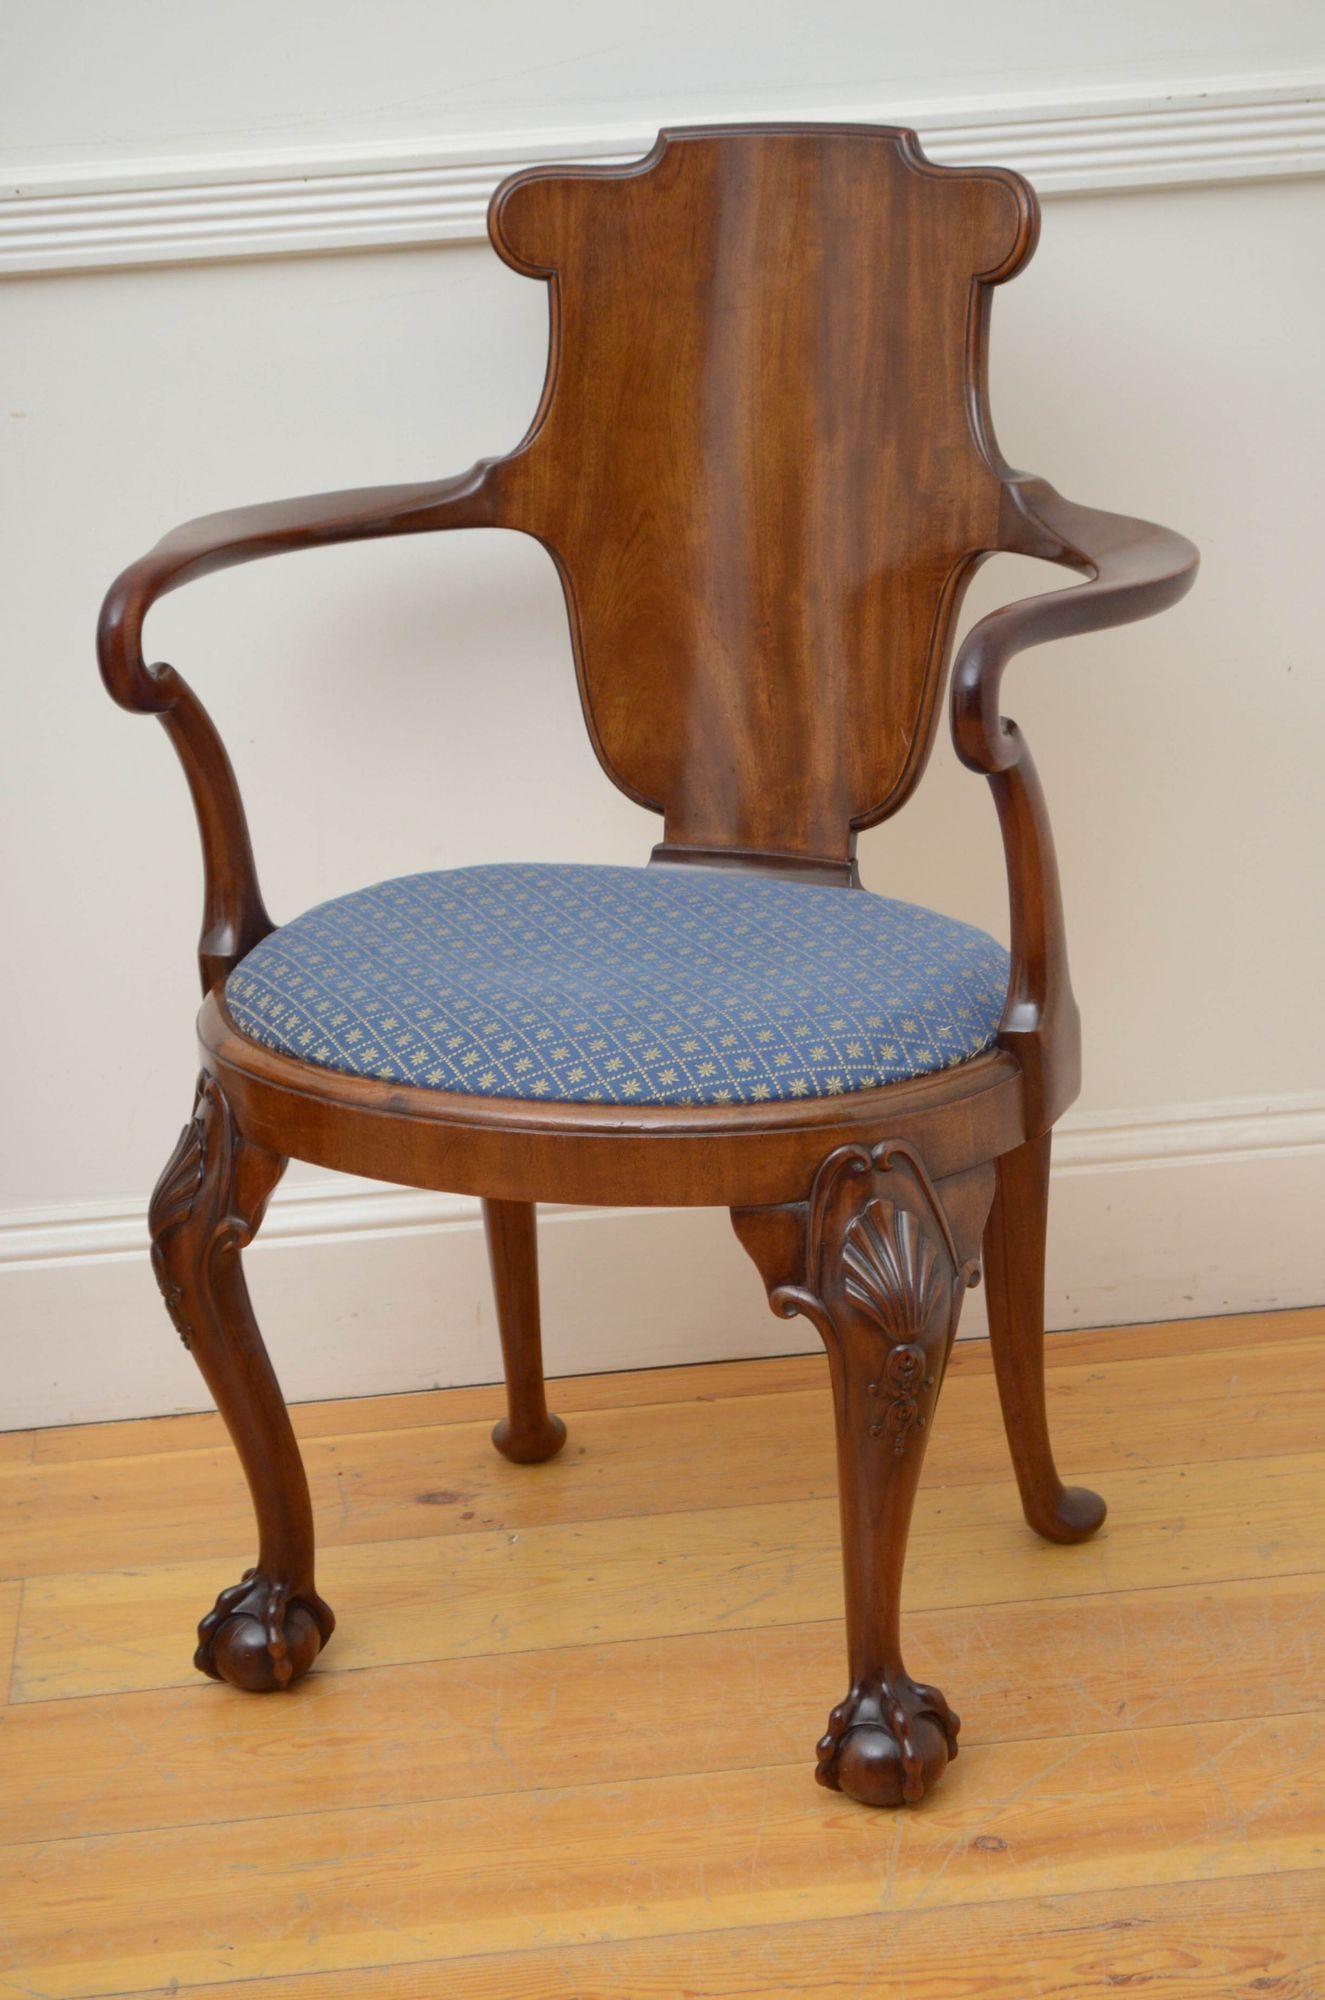 Sn5435 Fine quality the 'shepherd's crook' open armchair having 'escutcheon' cartouche-shaped back, 'shepherd's crook' arms and oval seat with horsehair upholstery, standing on shaped legs embellished with ‘Venus’ shells, carved ears above ball and